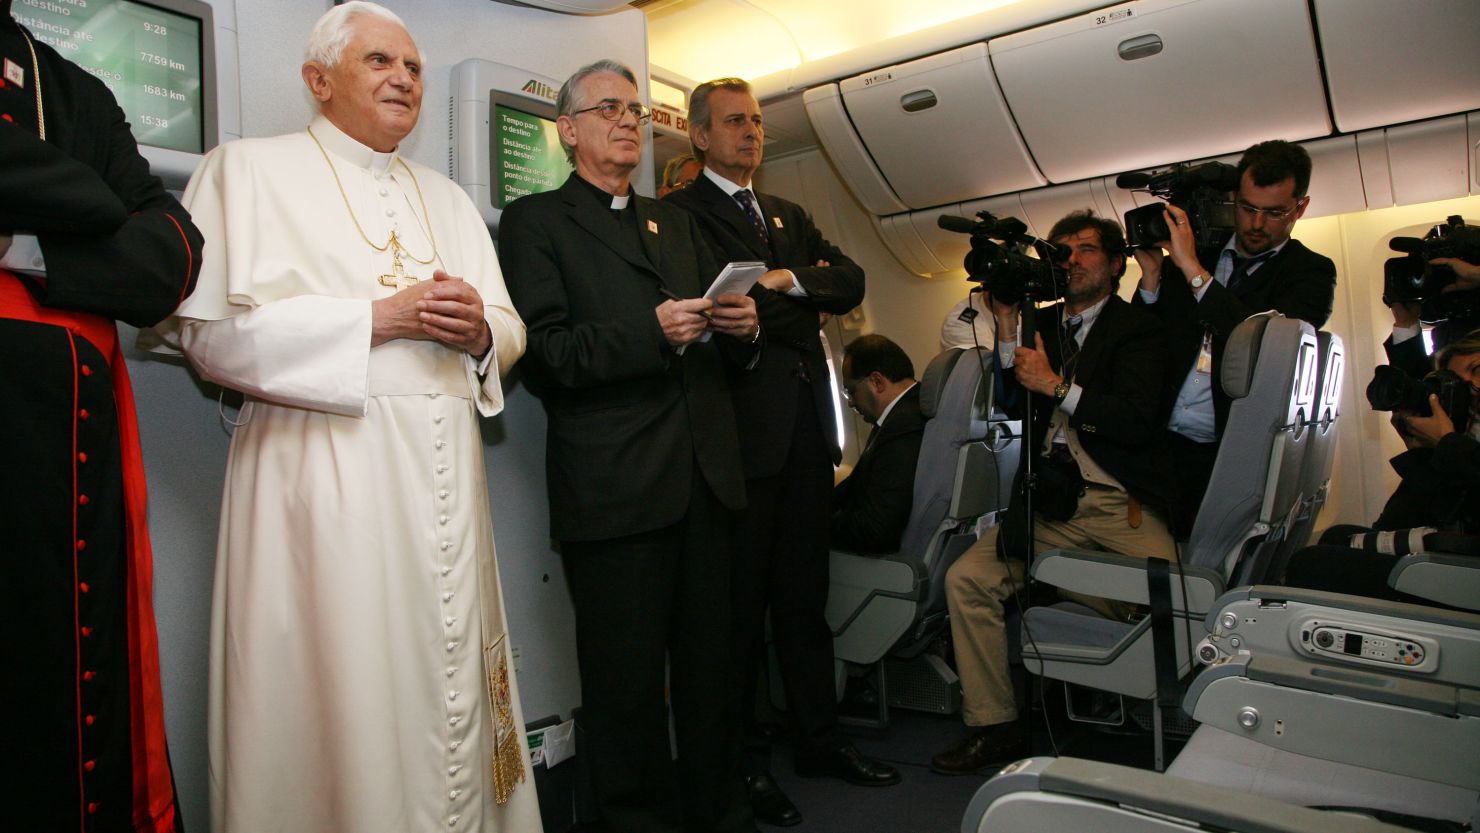 Press conferences aboard papal flights are often the only chance Vaticanisti have of getting close to the pontiff.